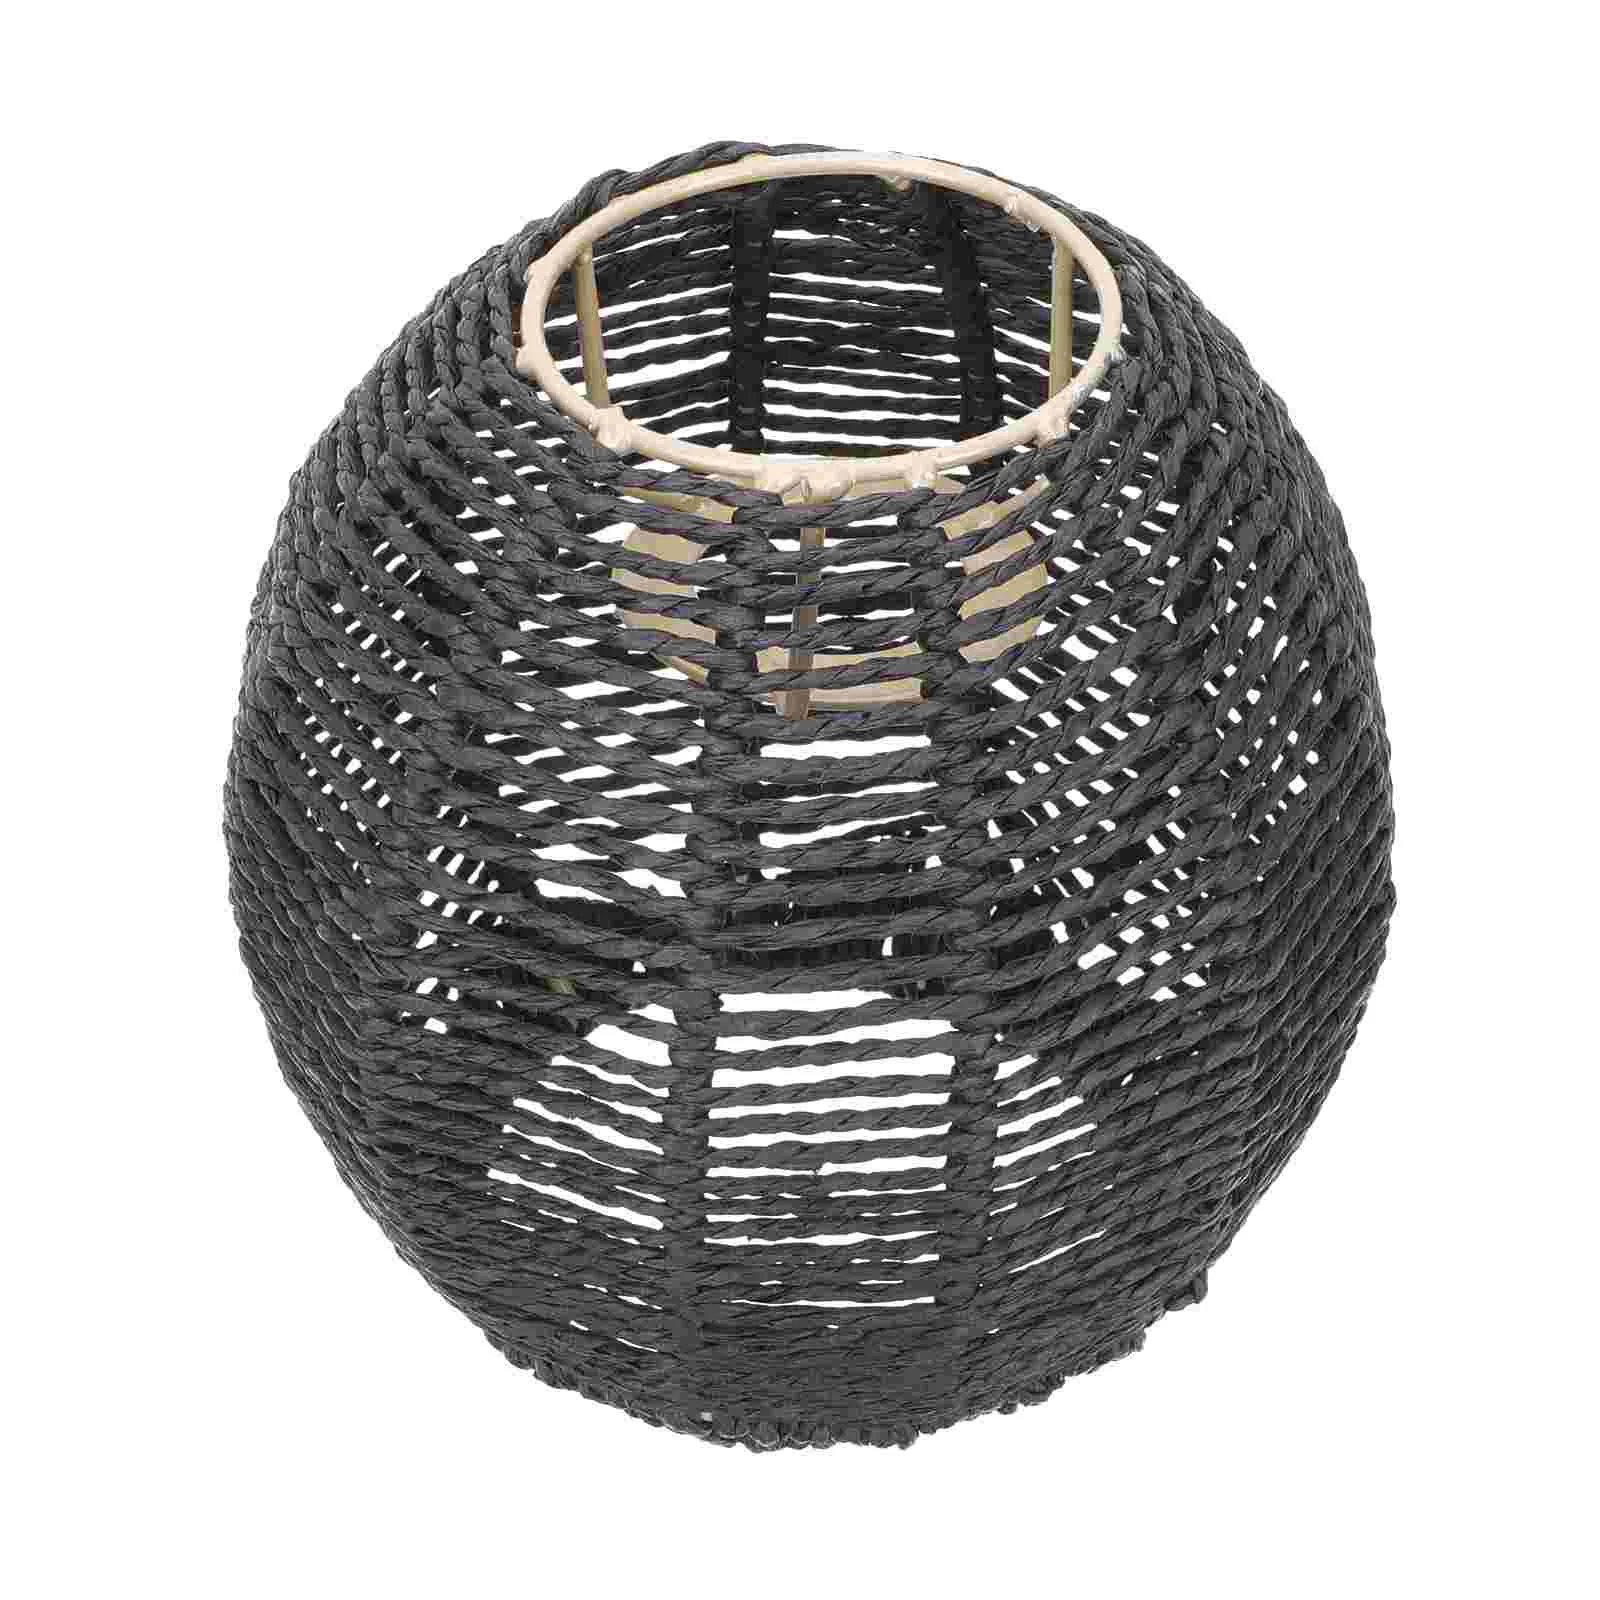 Woven Lampshade Lantern Home Pendant Paper Rope Hanging Ceiling Light Chic Accessory